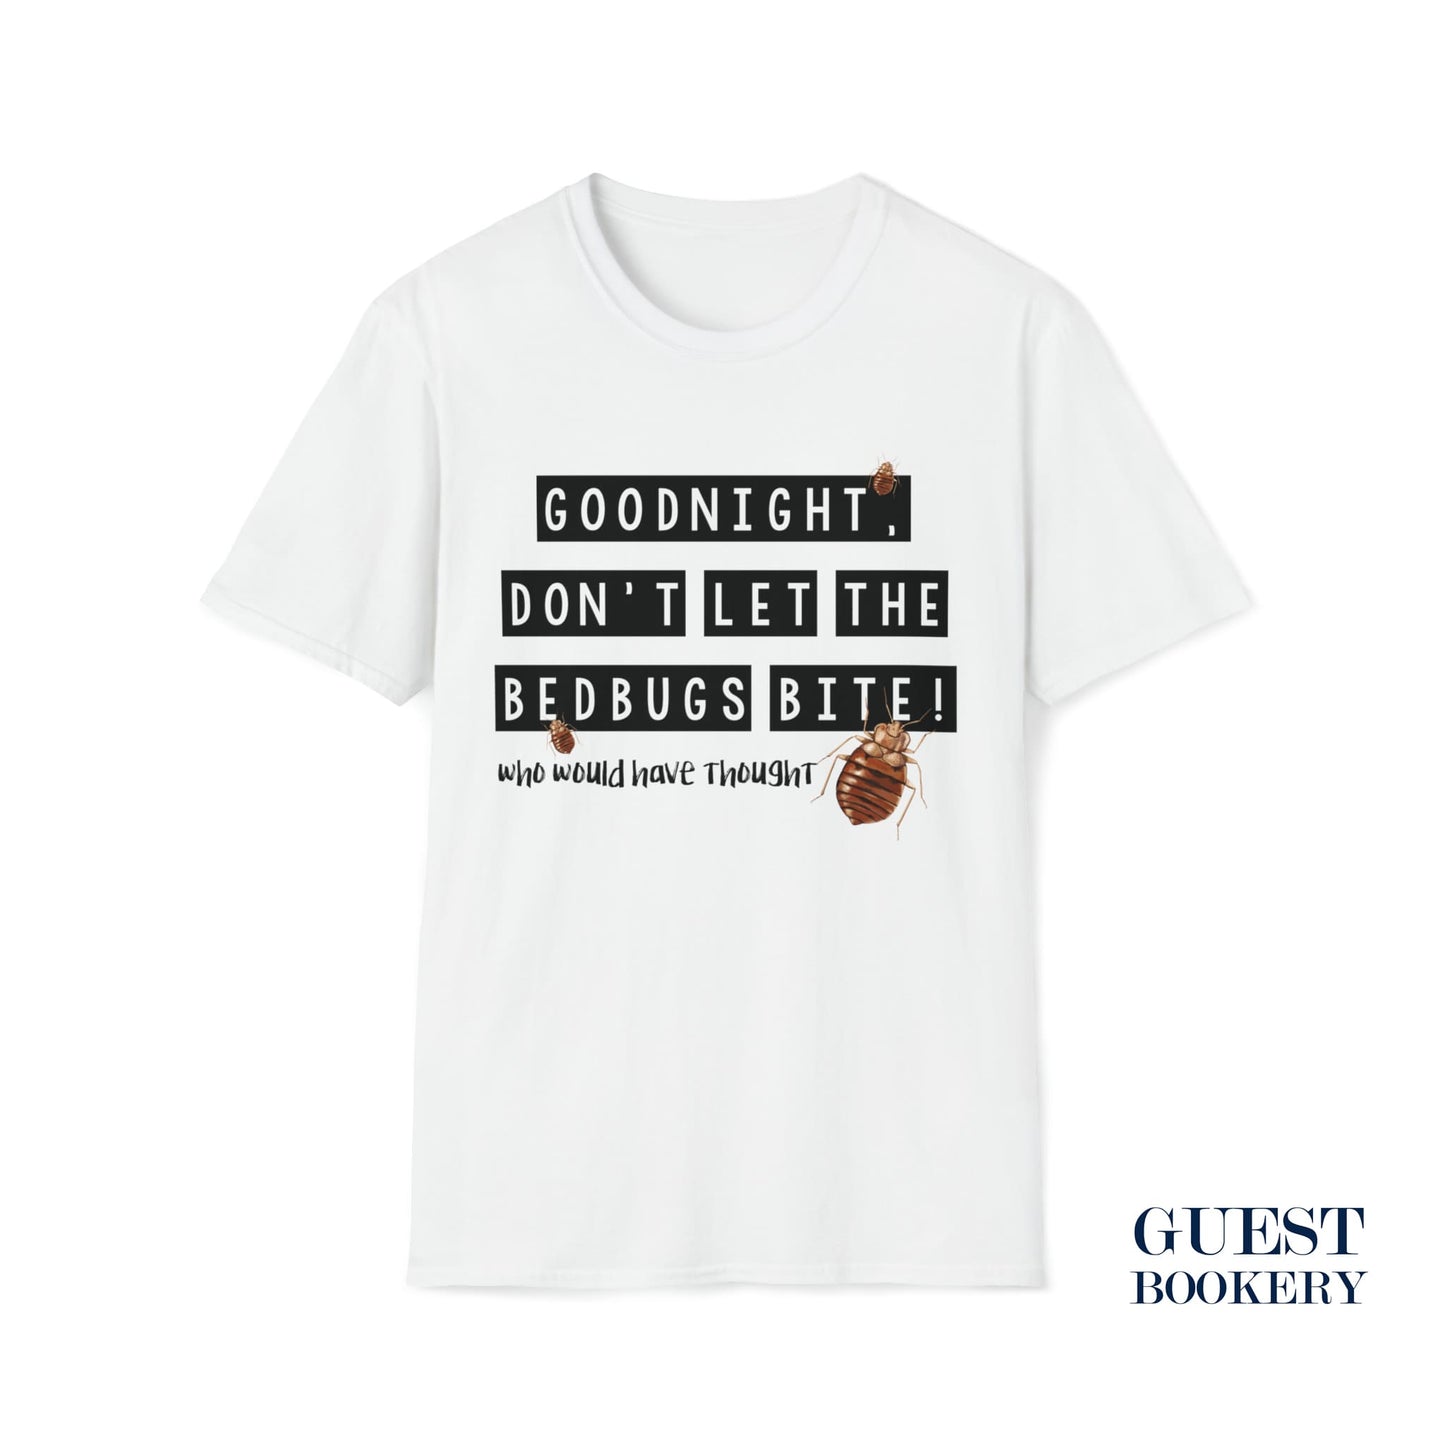 Good Night, Don't Let the Bedbugs Bite... Who Would Have Thought? T-Shirt